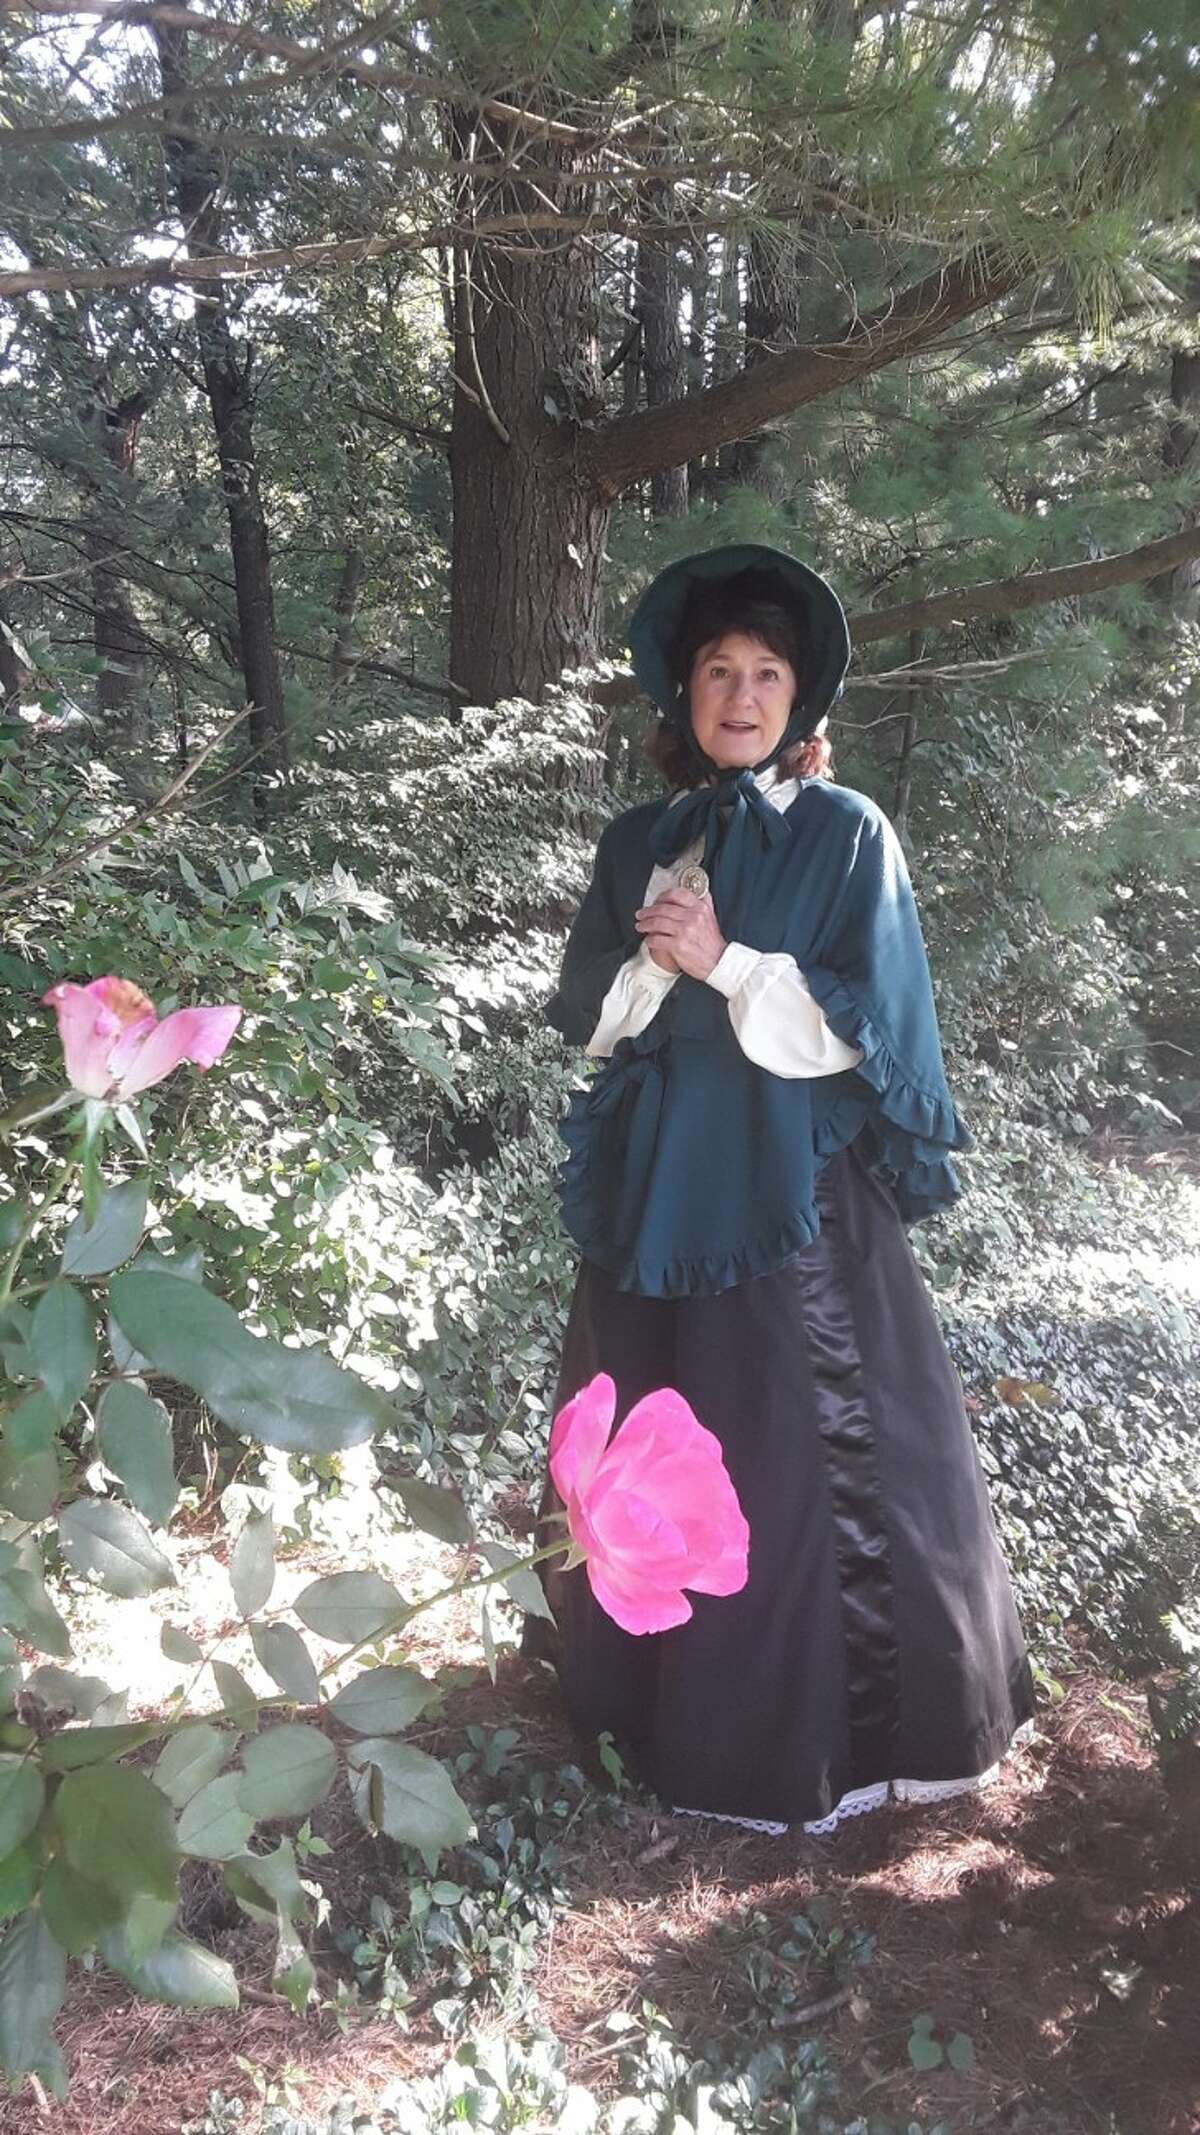 Myra Schoenleber-Farrell, (EHS Class  of 1973) is the Voice of Sarah J. Whiteside, the first wife of Dr. Joseph Pogue, for "Voices of Our Past" on Oct. 8 at Woodlawn Cemetery in Edwardsville. Whiteside died in 1860 while giving birth to a daughter, who, likewise, did not survive. Joseph Pogue (portrayed by Robert Semon, EHS Class of 1972), would outlive two subsequent wives.